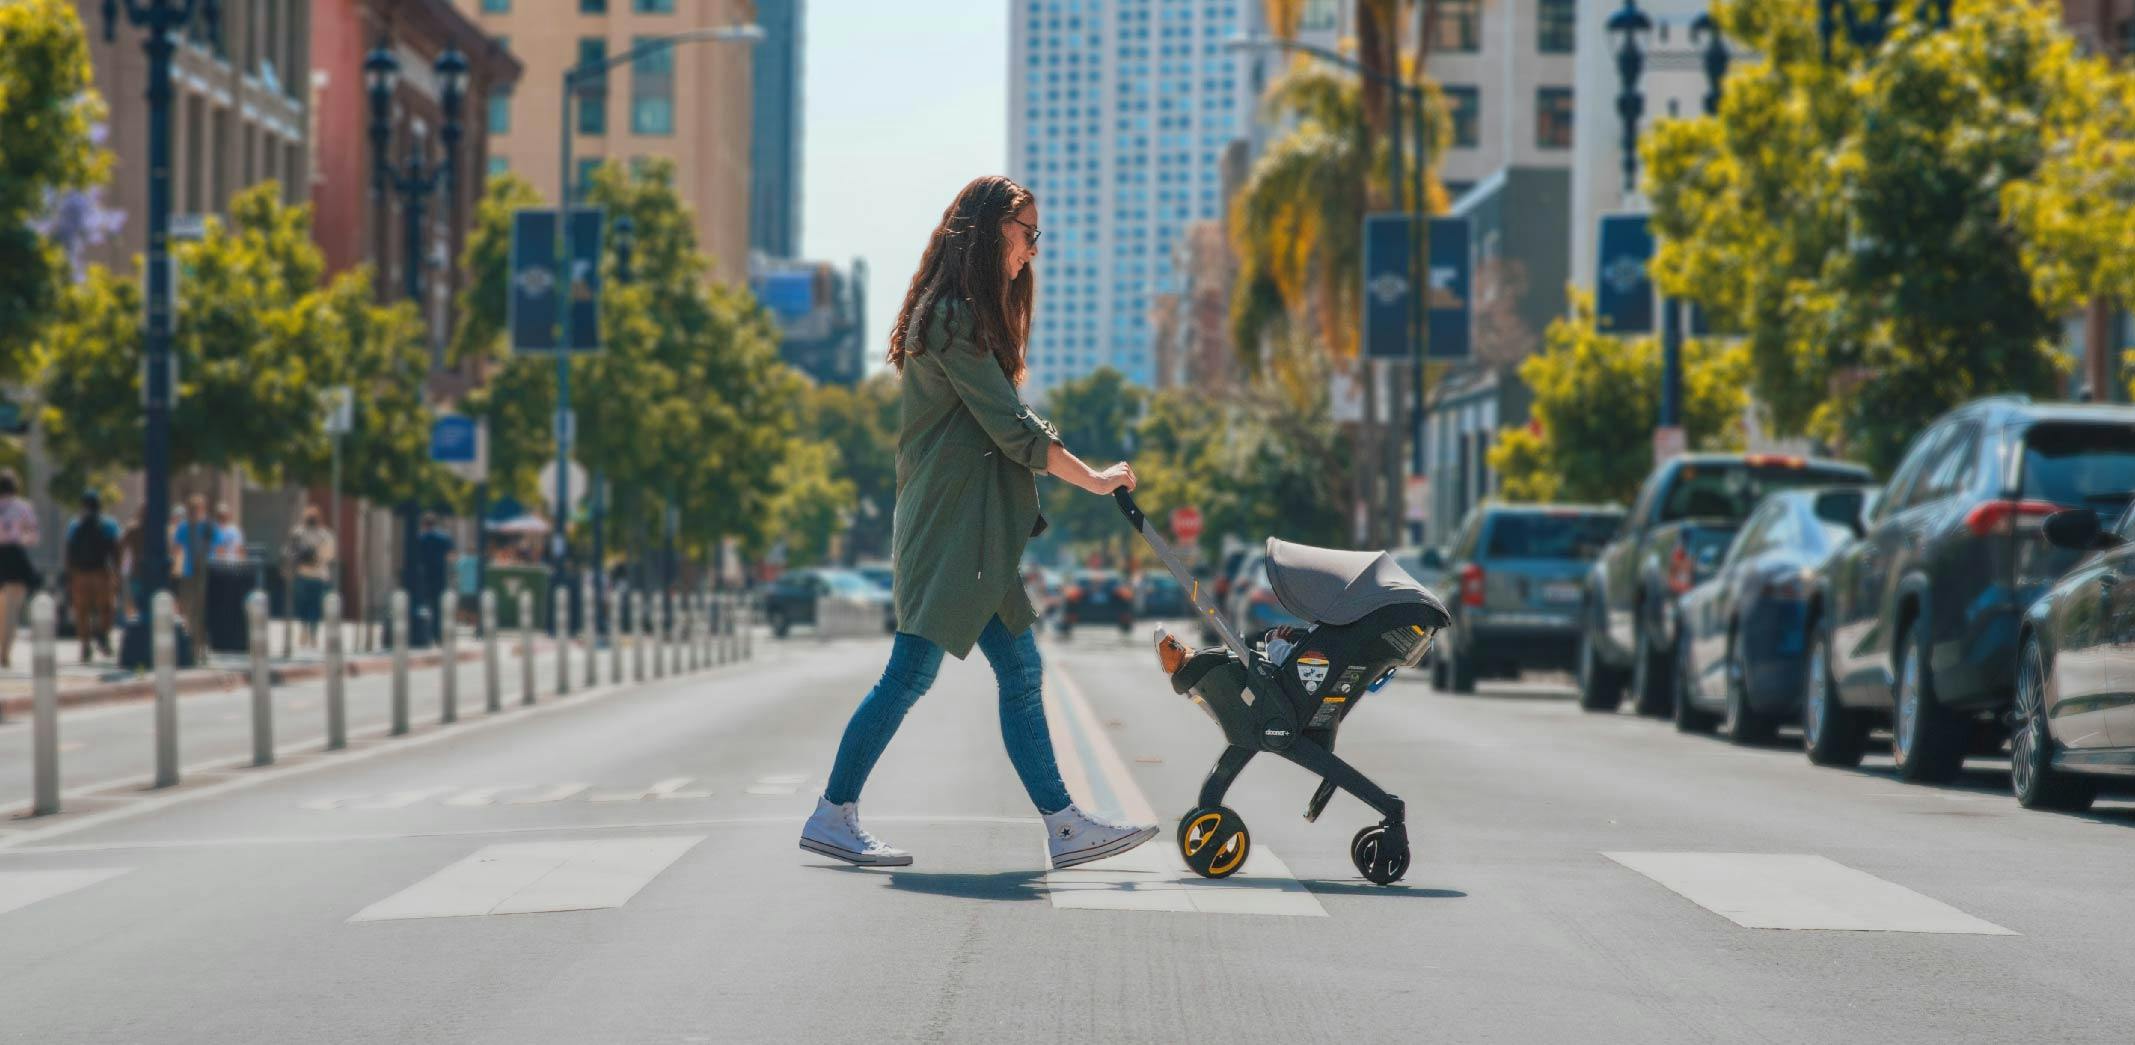 Blog - Why Doona Is The Best Baby Stroller For Travel, Daily Life, And Everything In Between